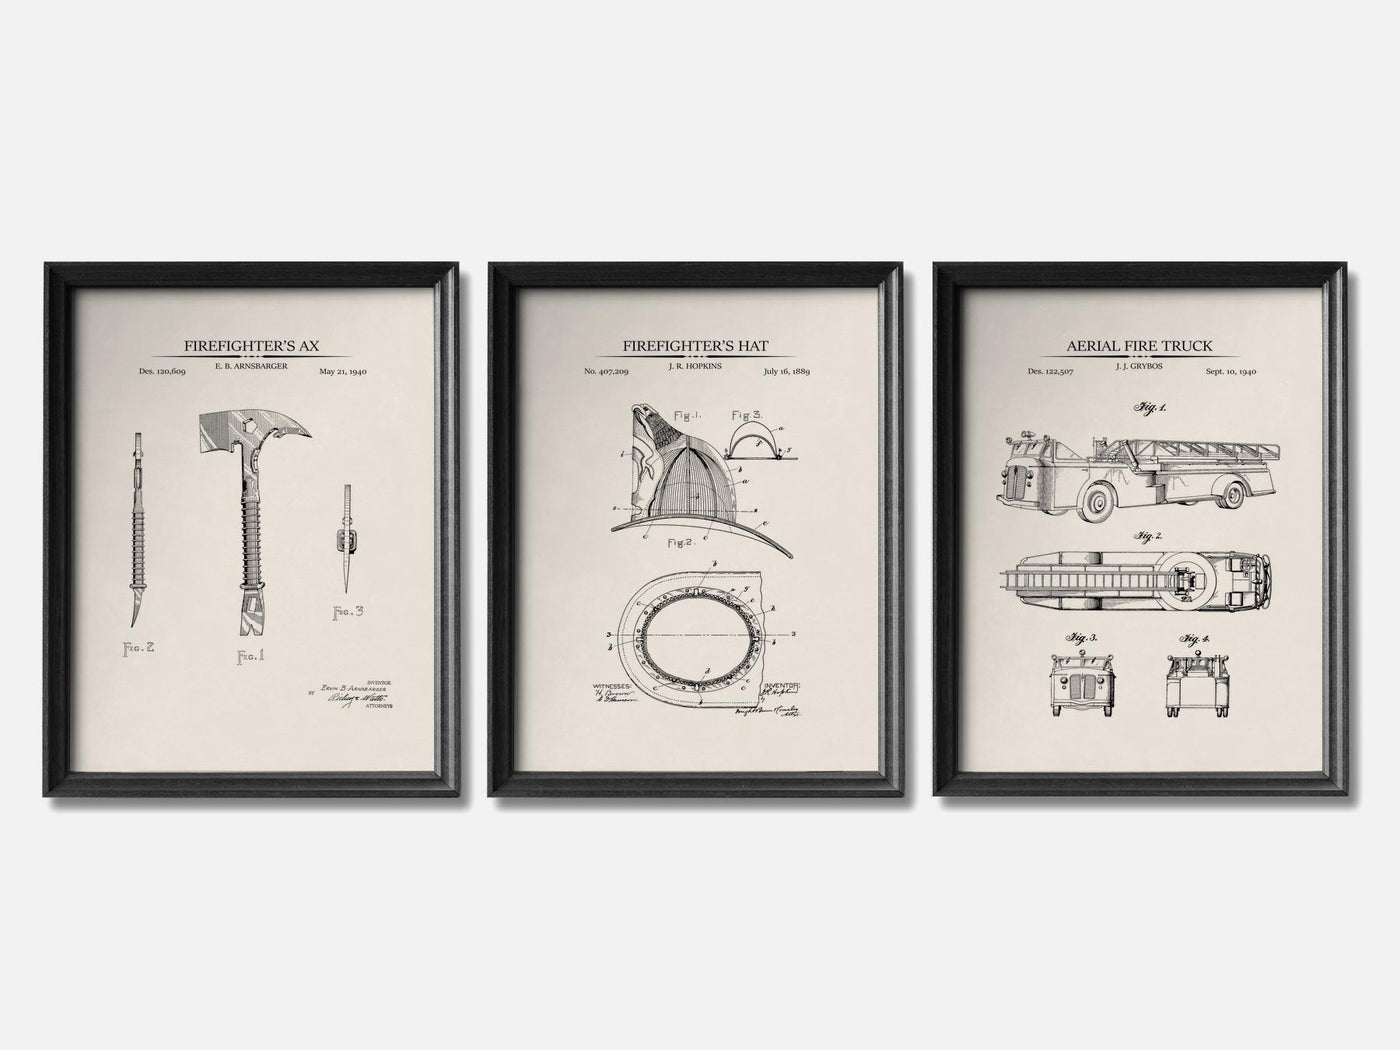 Firefighter Patent Print Set of 3 mockup - A_t10067-V1-PC_F+B-SS_3-PS_11x14-C_ivo variant